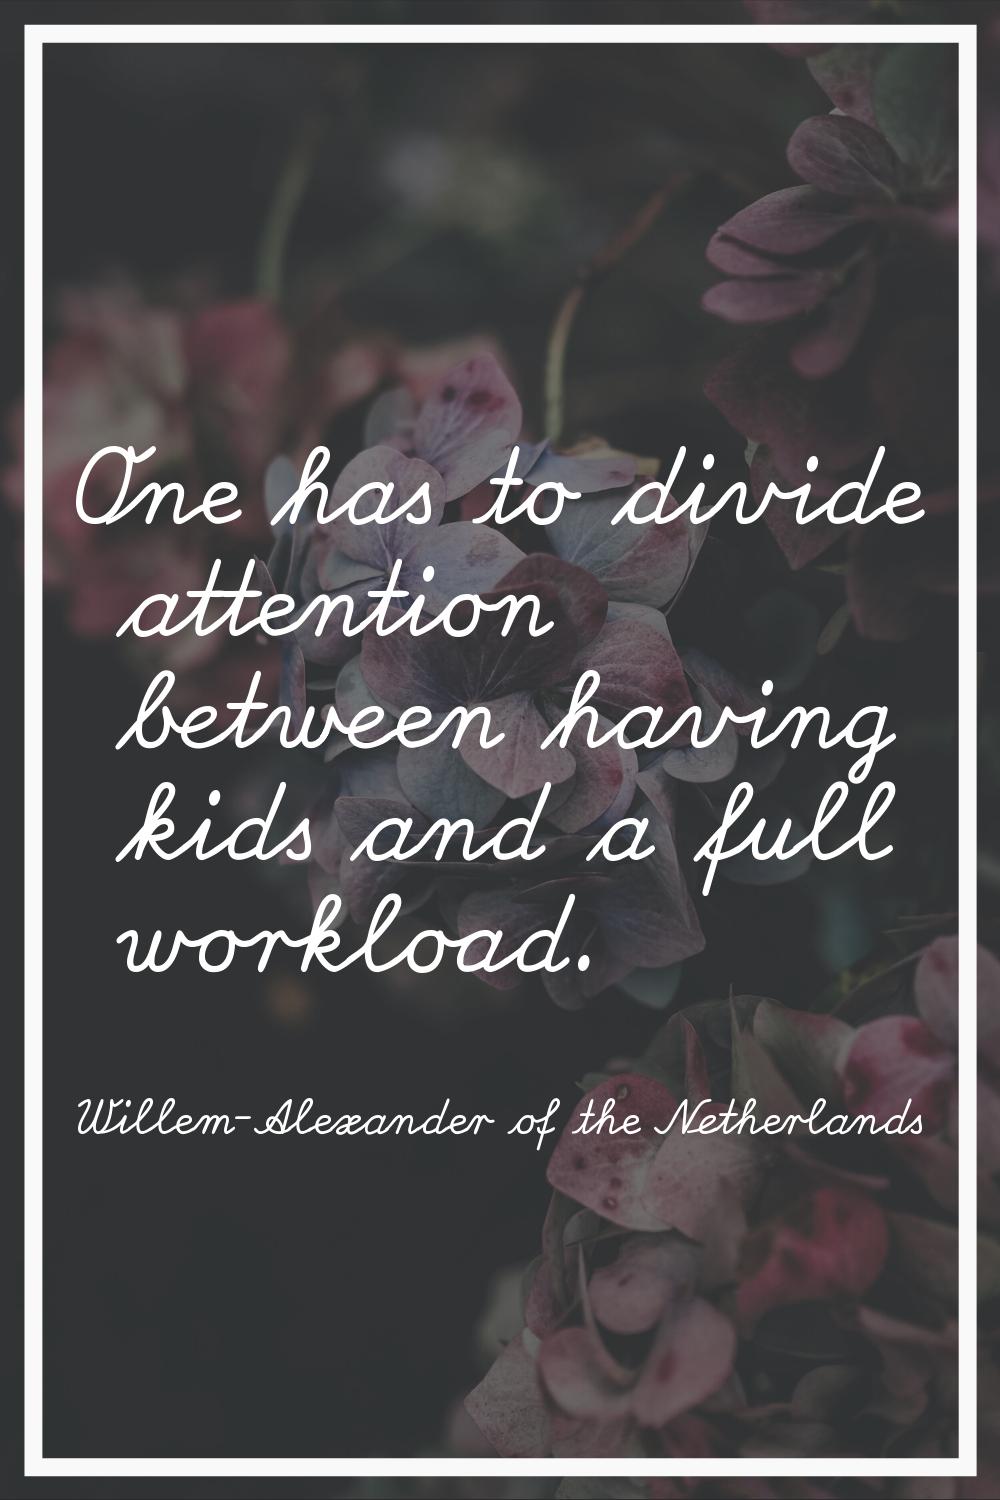 One has to divide attention between having kids and a full workload.